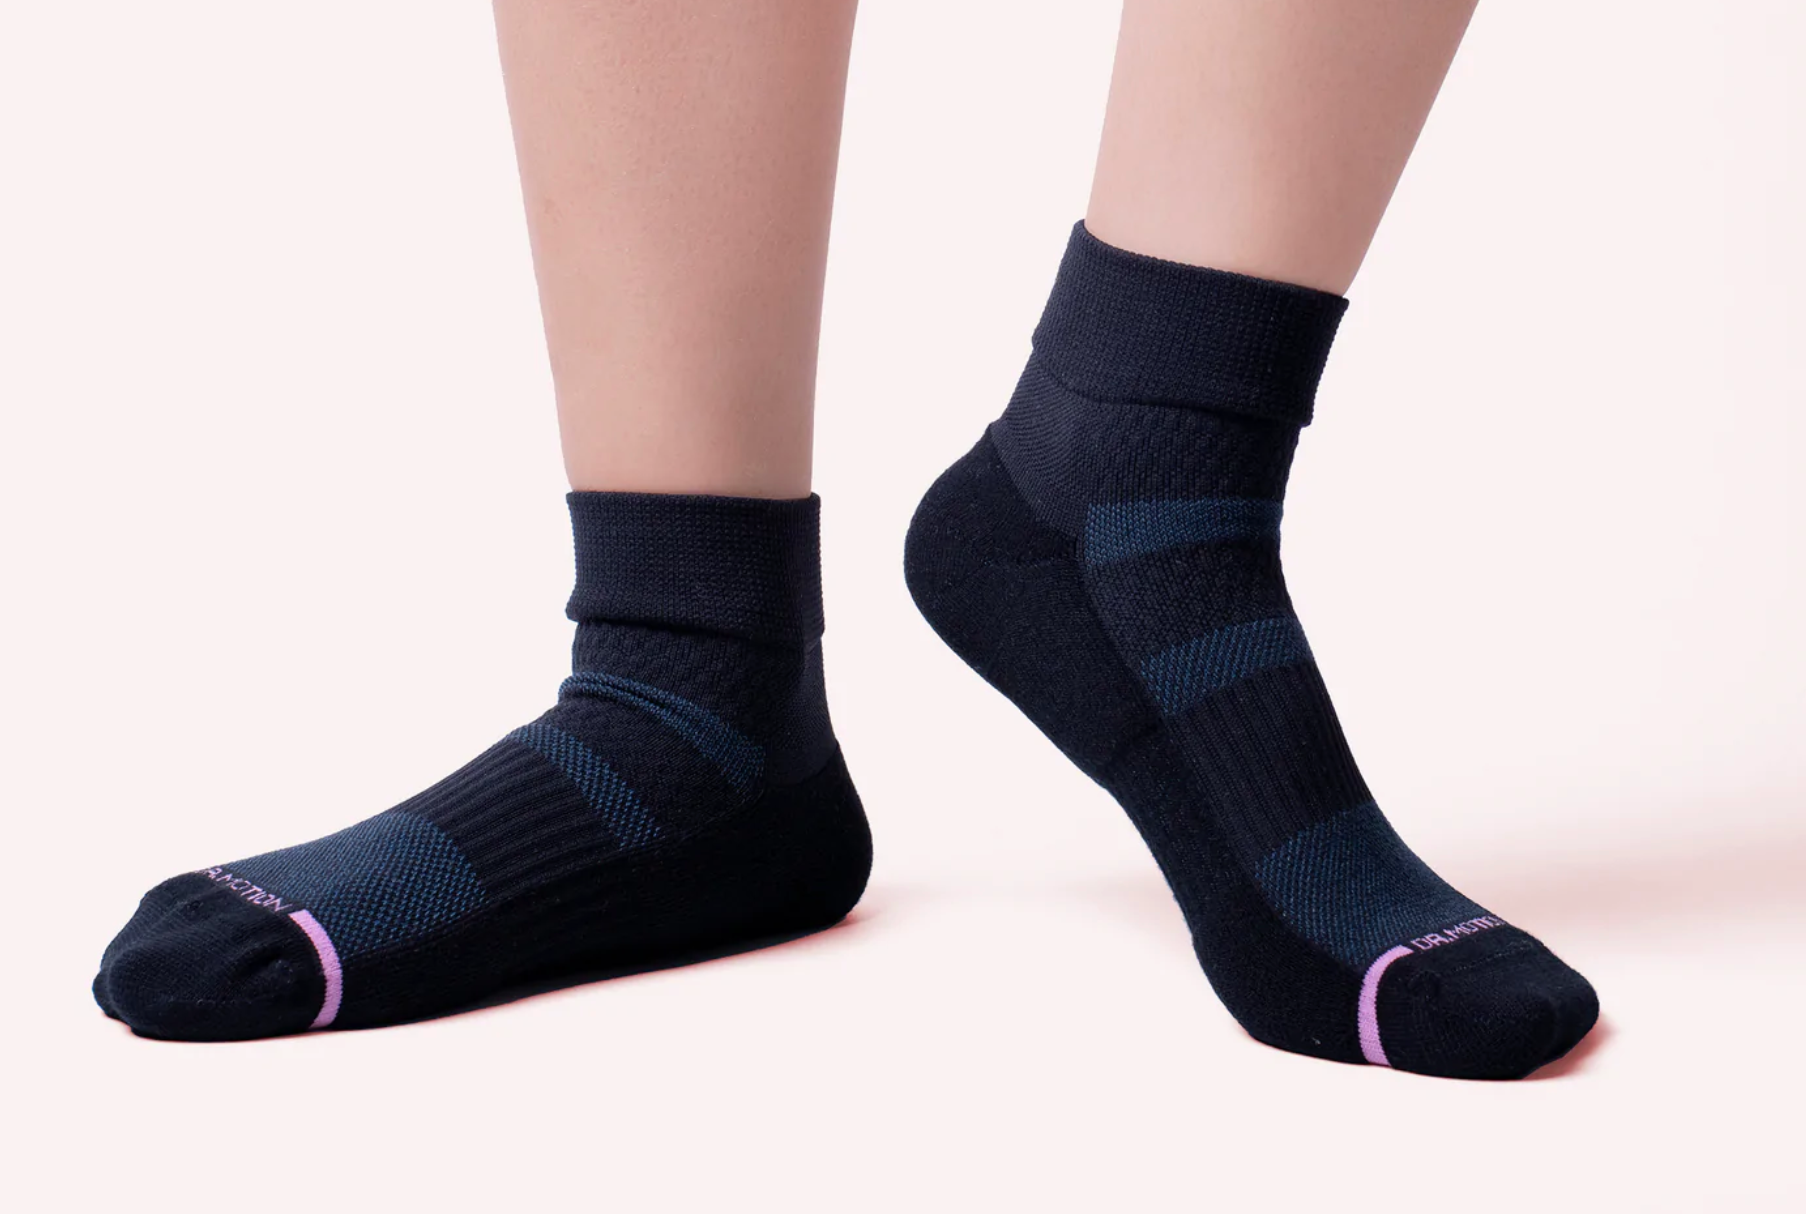 What Are Graduated Compression Socks?, Dr. Motion